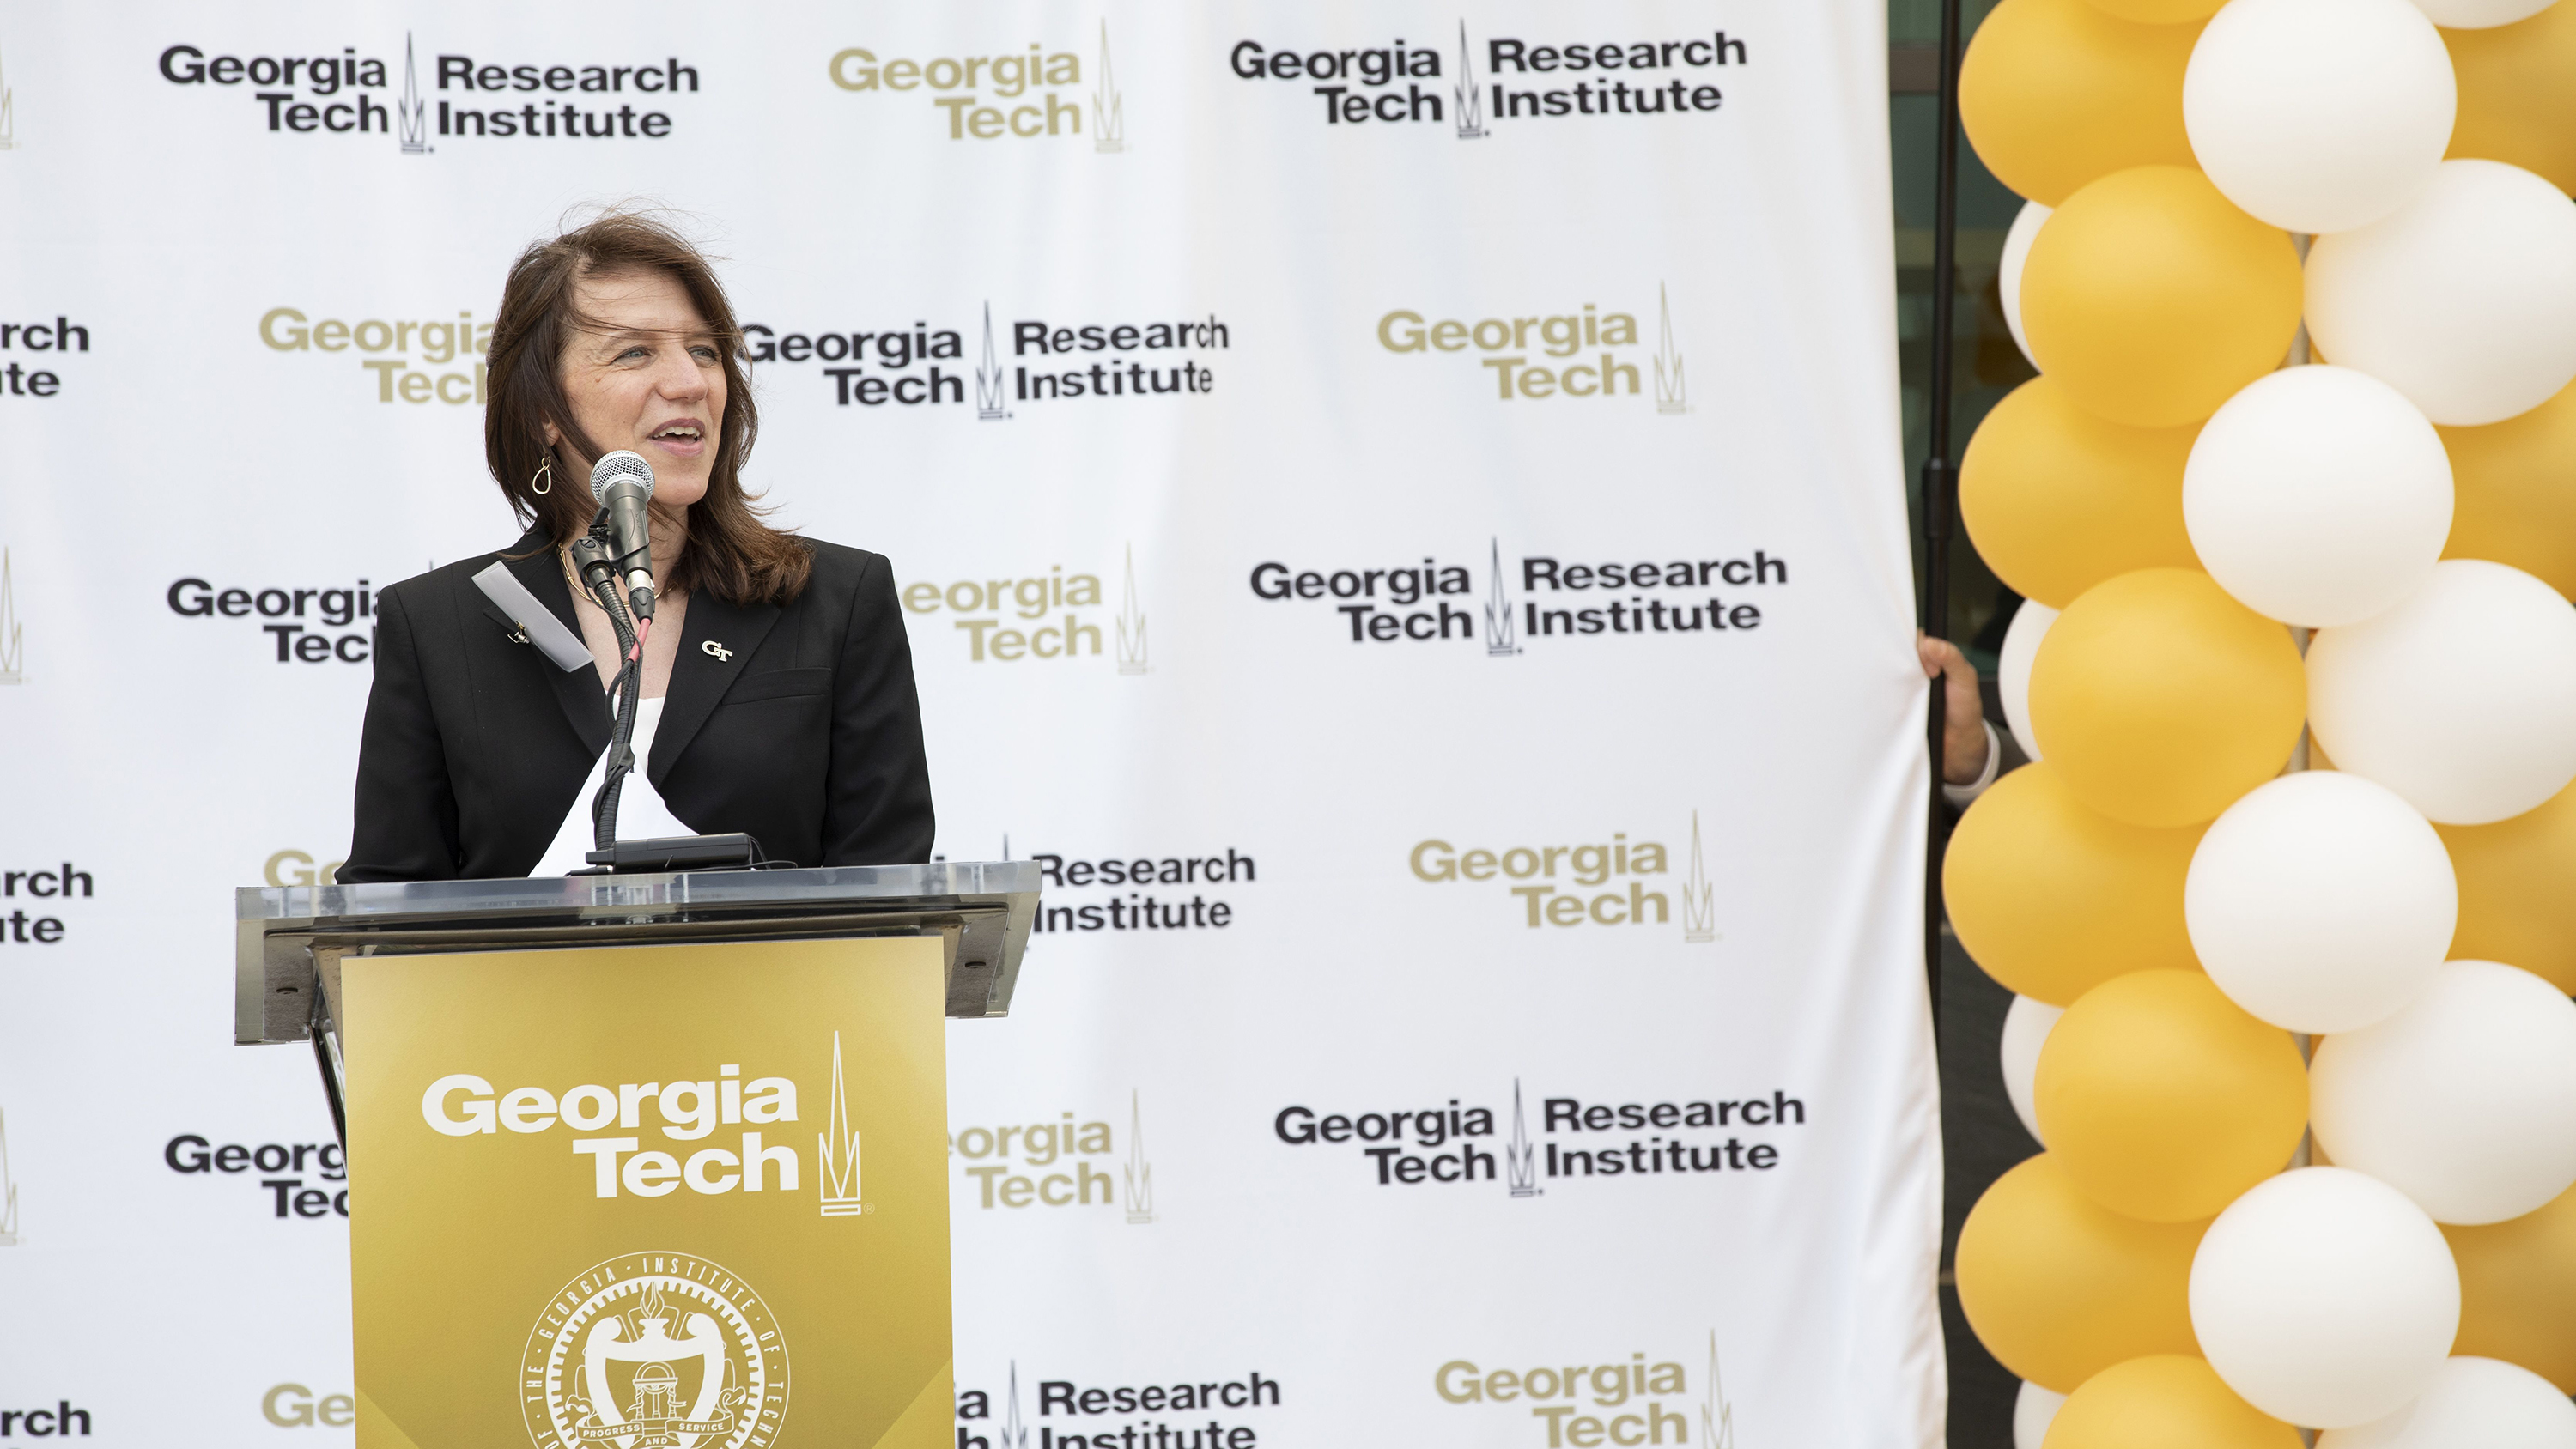 Interim Director Lora Weiss speaks at the Ribbon Cutting Ceremony for GTRI's new Cobb County Research Facility-South. Photo: Sean McNeil